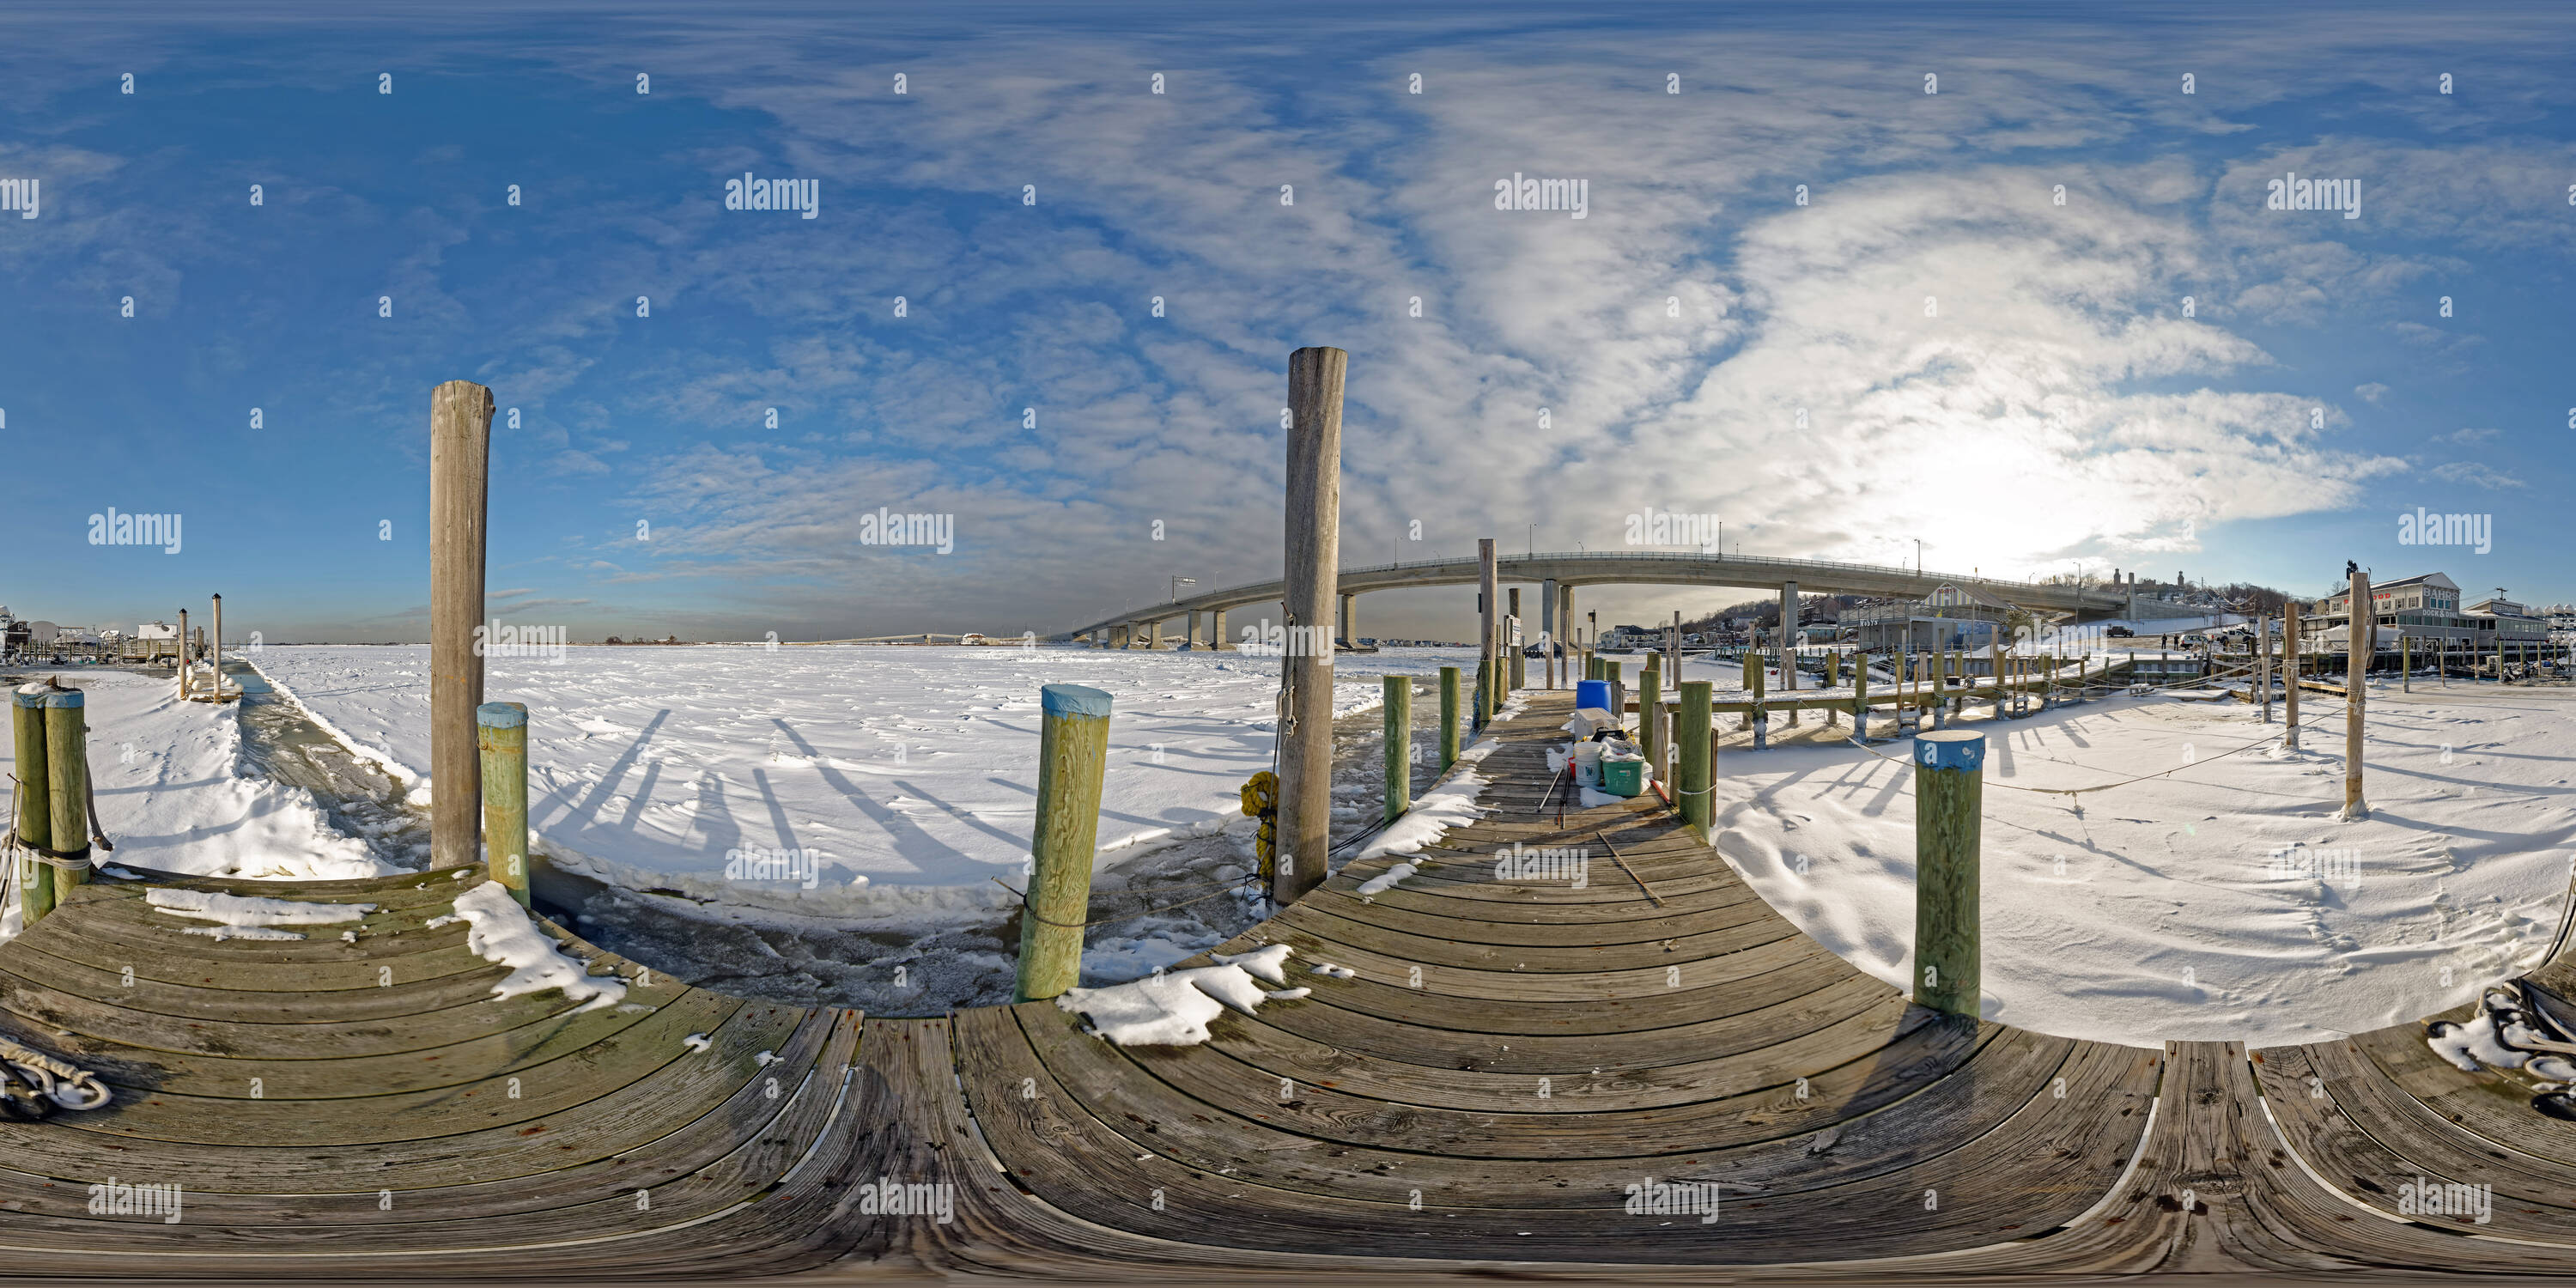 360 degree panoramic view of Winter, Highlands-Sea Bright Bridge and Bahrs Landing, Highlands, NJ, USA